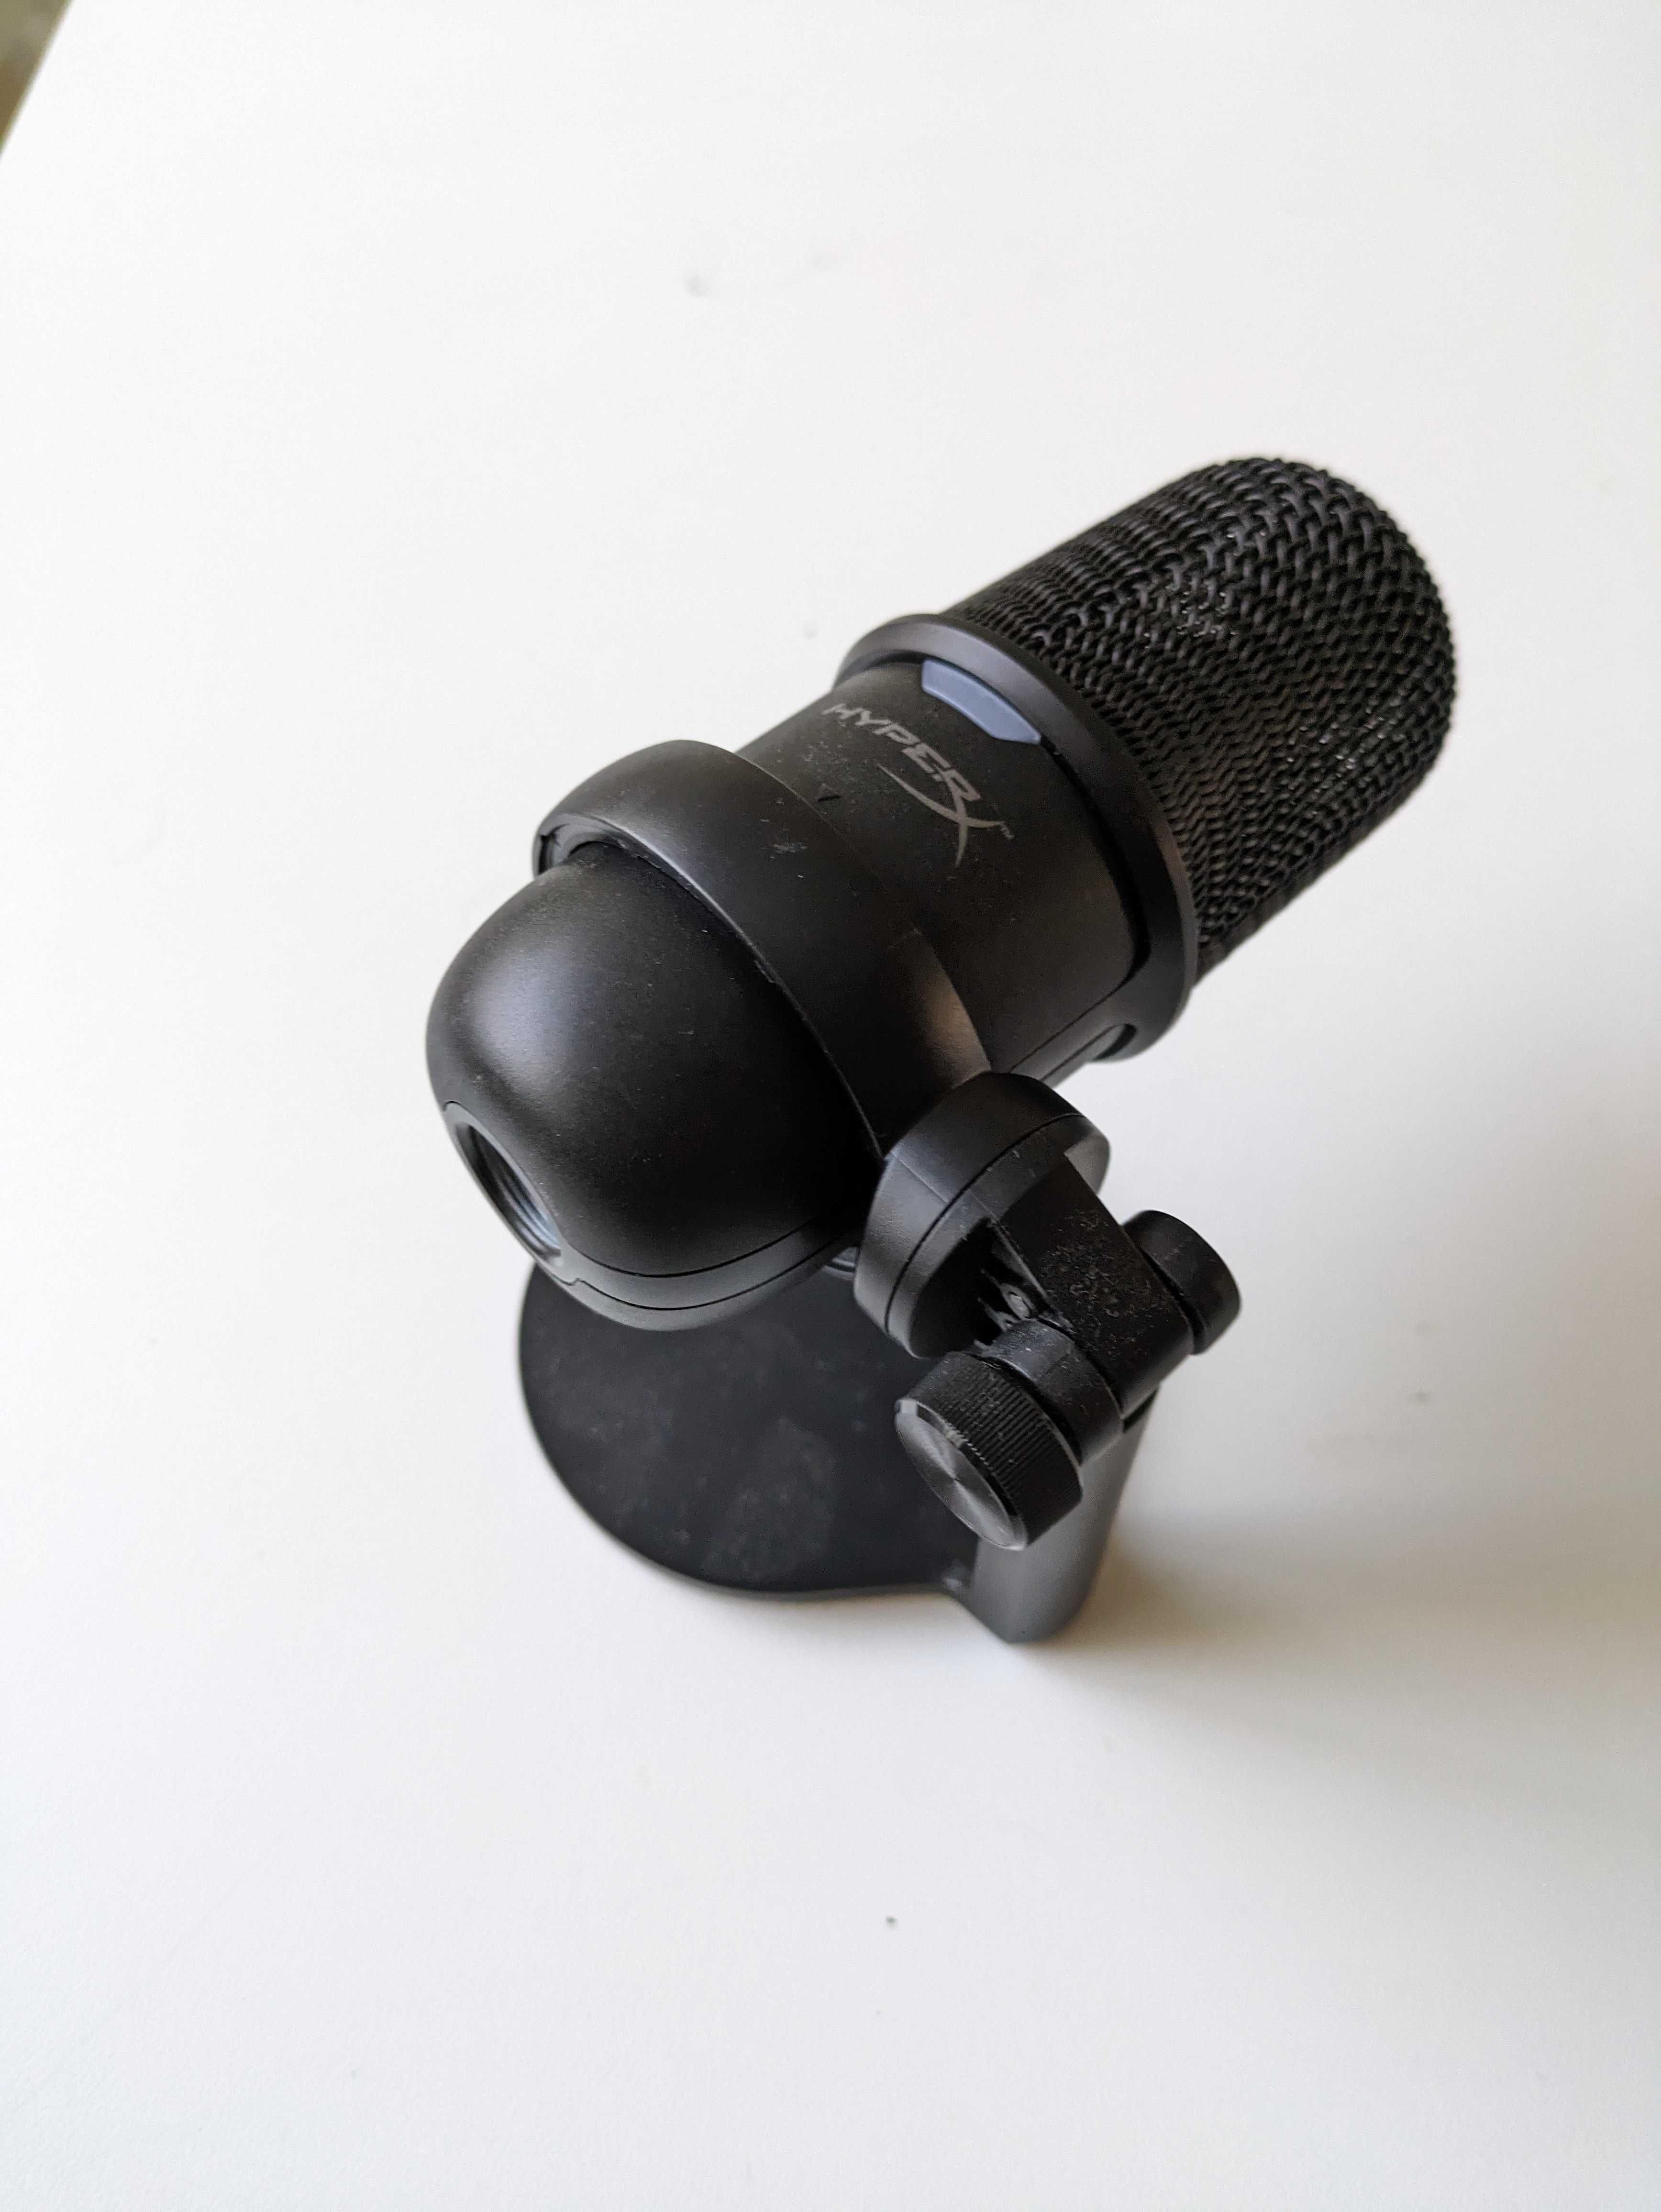 HyperX SoloCast - gaming microphone